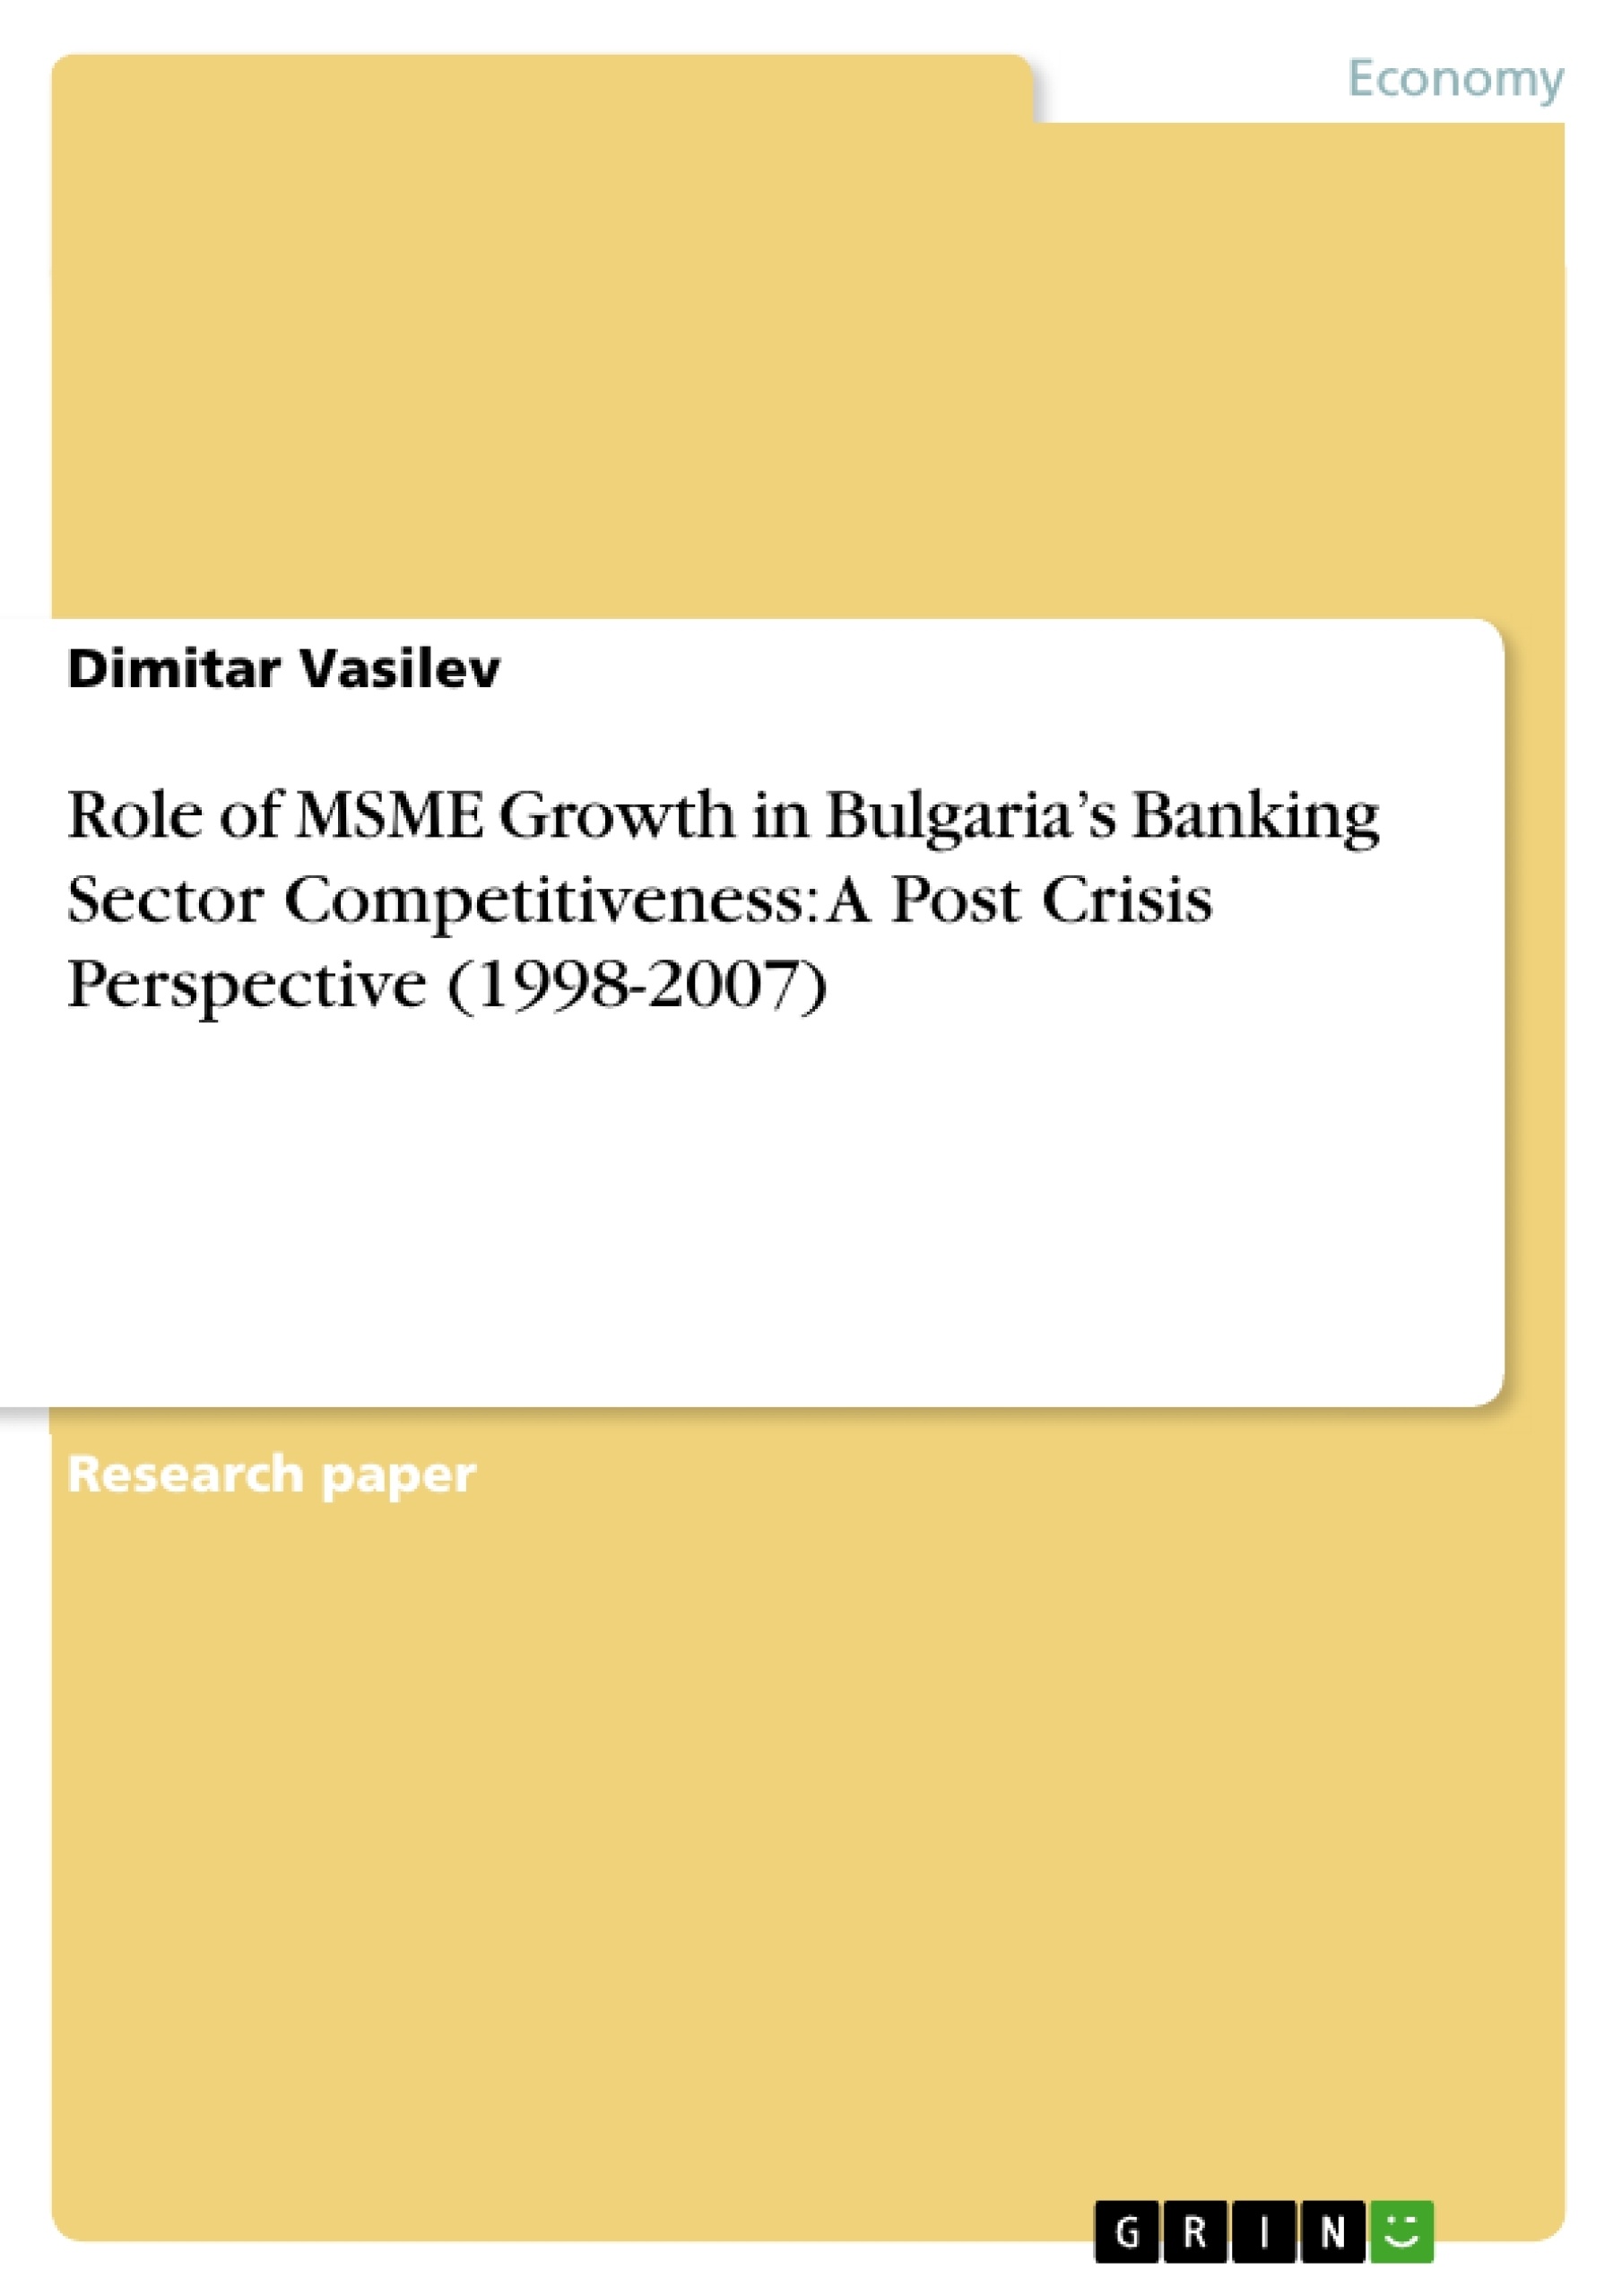 Title: Role of MSME Growth in Bulgaria’s Banking Sector Competitiveness: A Post Crisis Perspective (1998-2007)